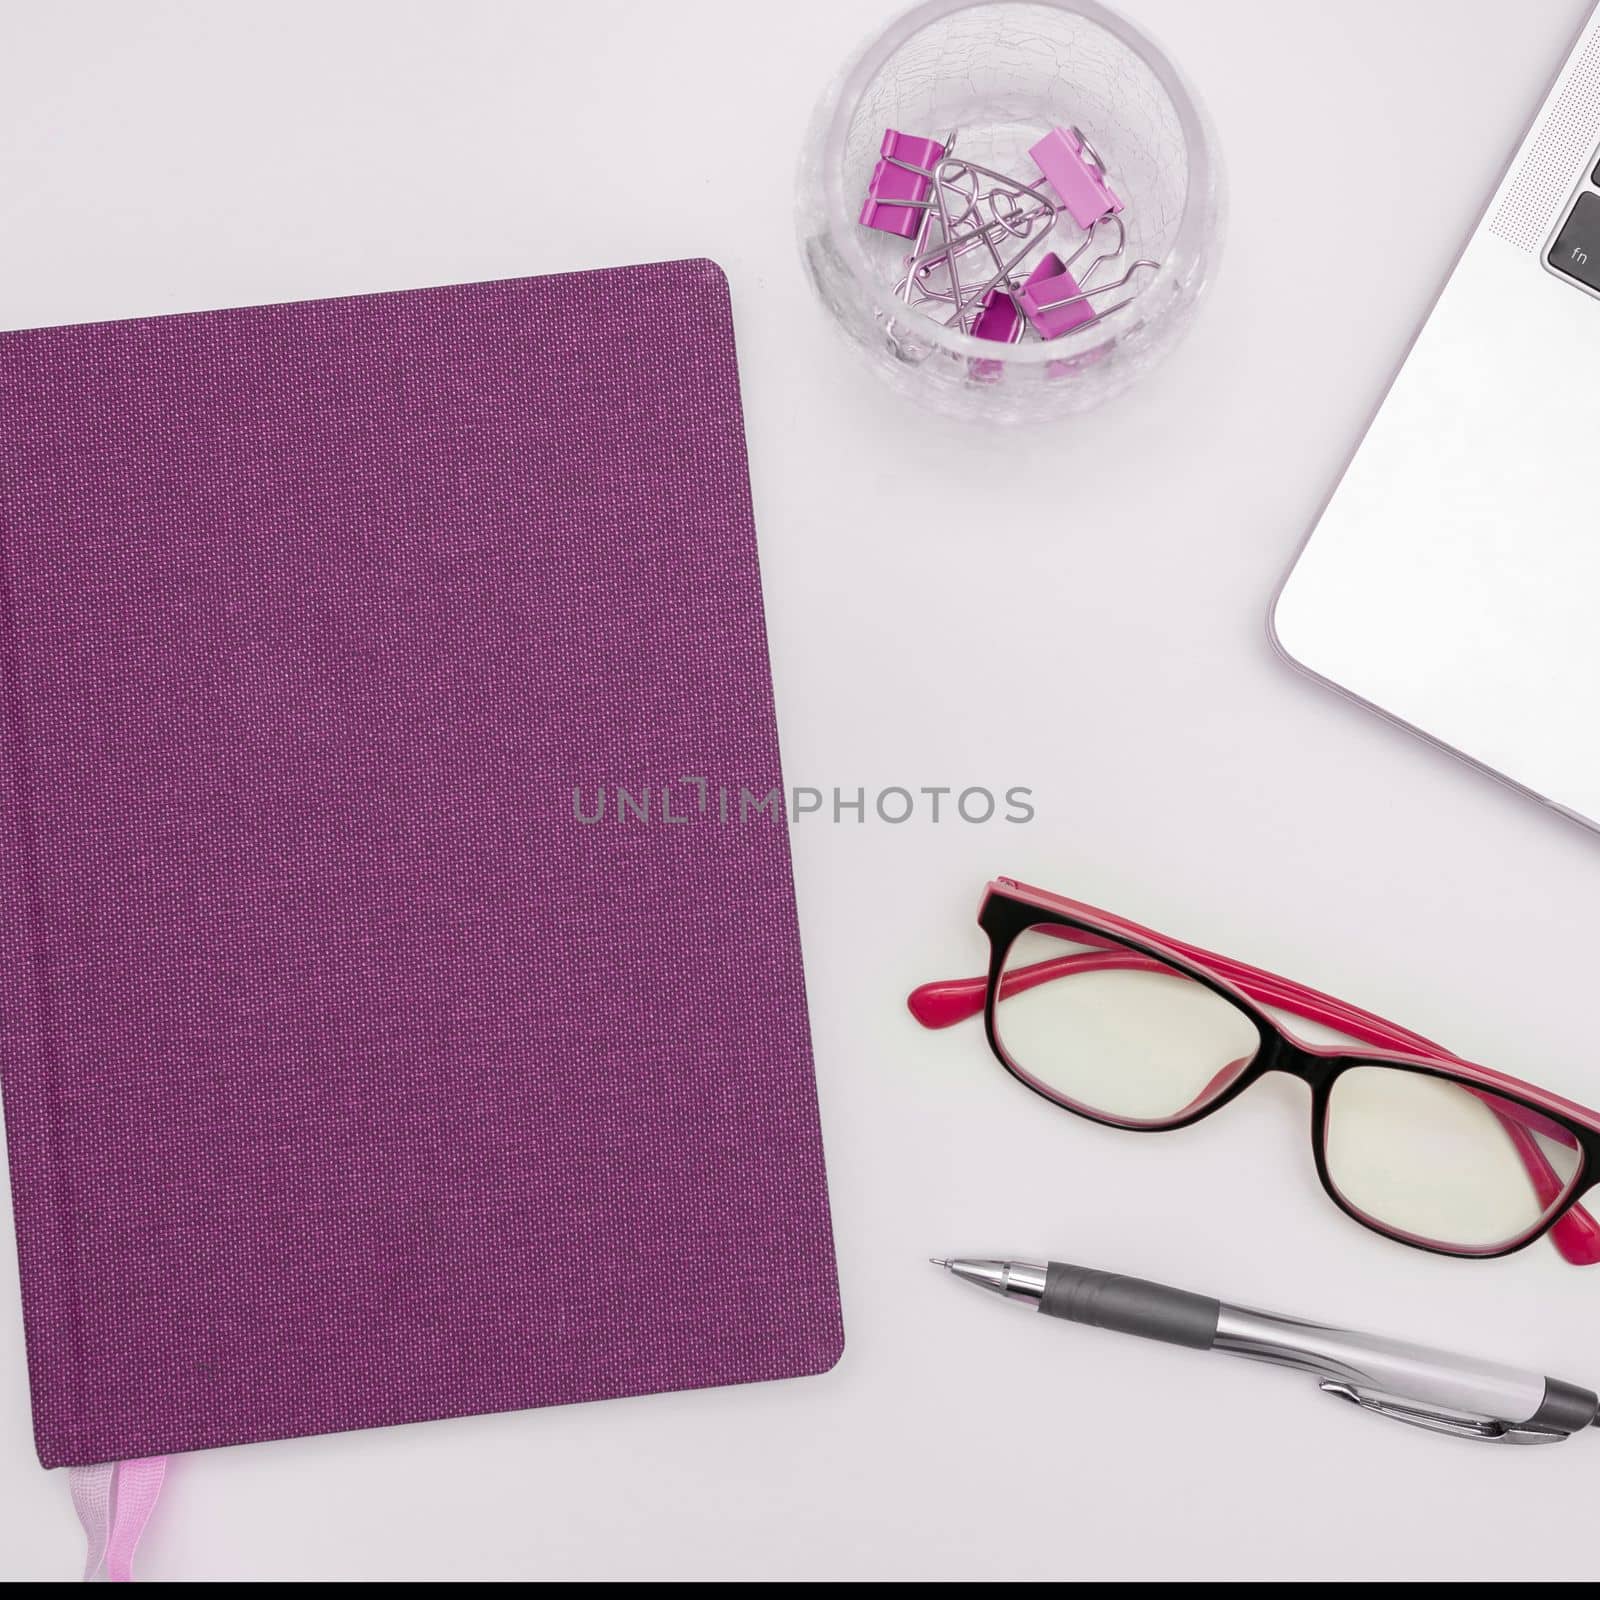 Office Supplies Over Desk With Keyboard And Glasses And Coffee Cup For Working Remotely, Assorted School Utilities For Studying With Hot Drink And Eyeglasses. by nialowwa